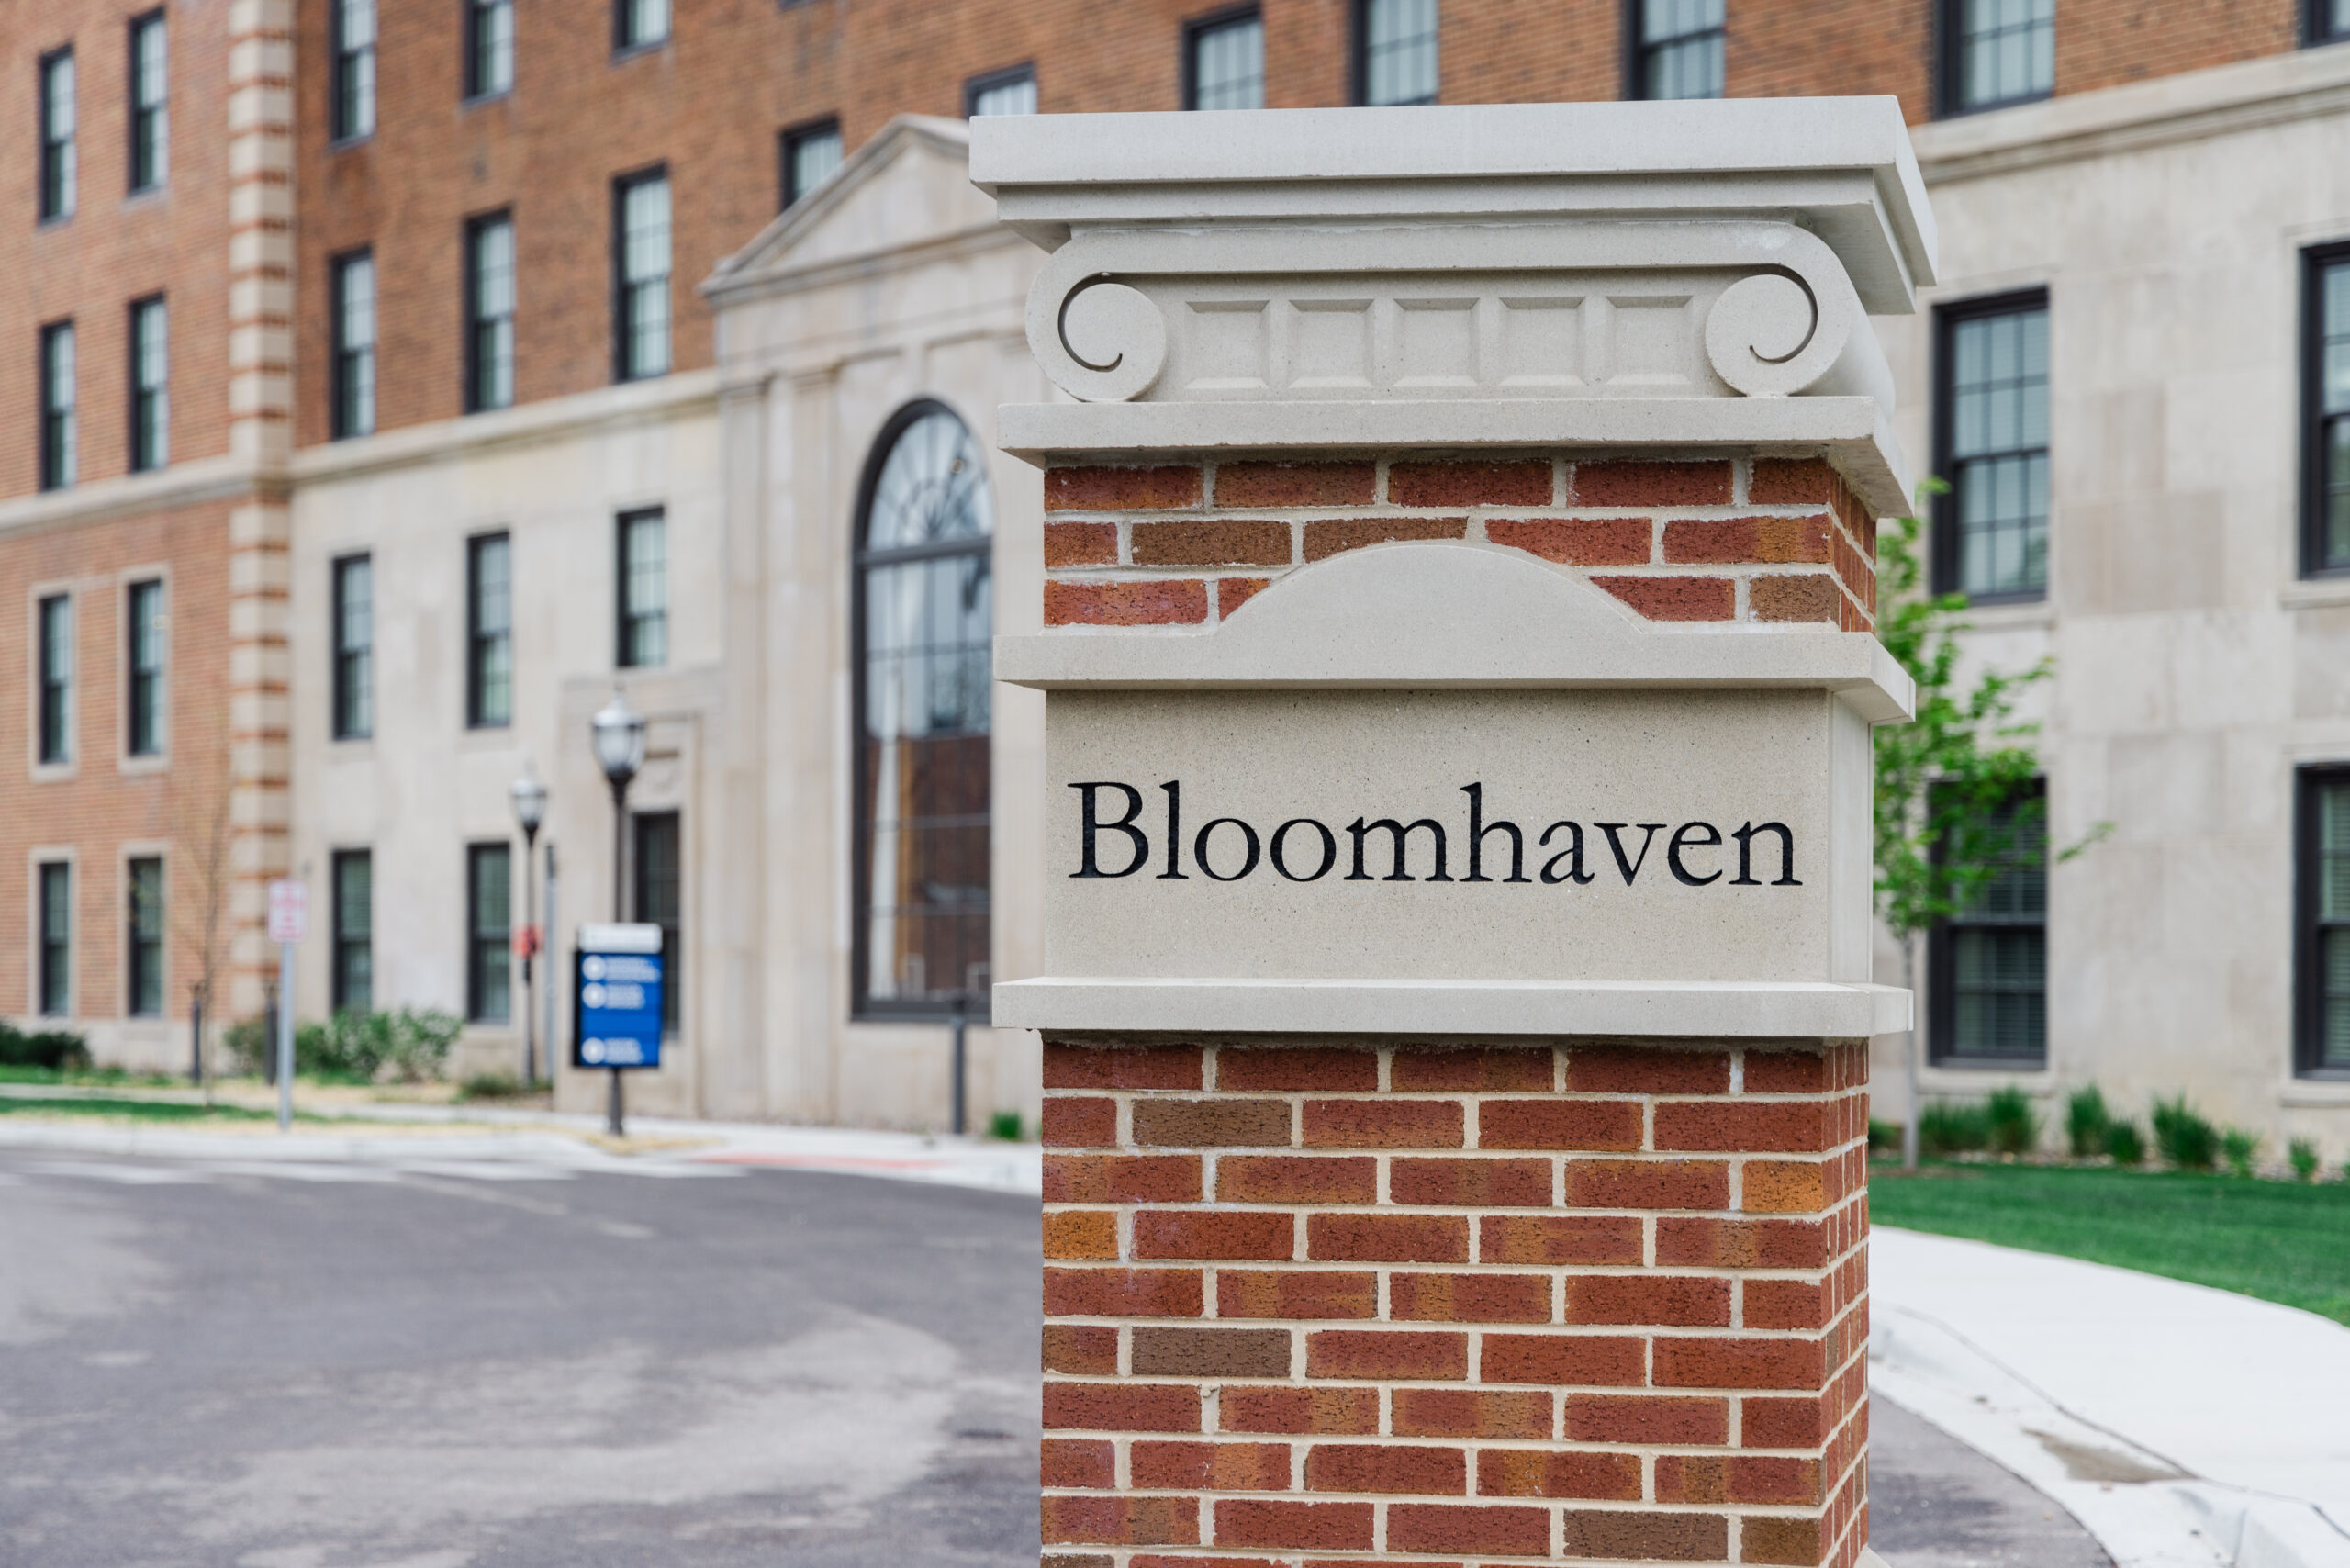 A photo showing the Bloomhaven Medical and Wellness Center